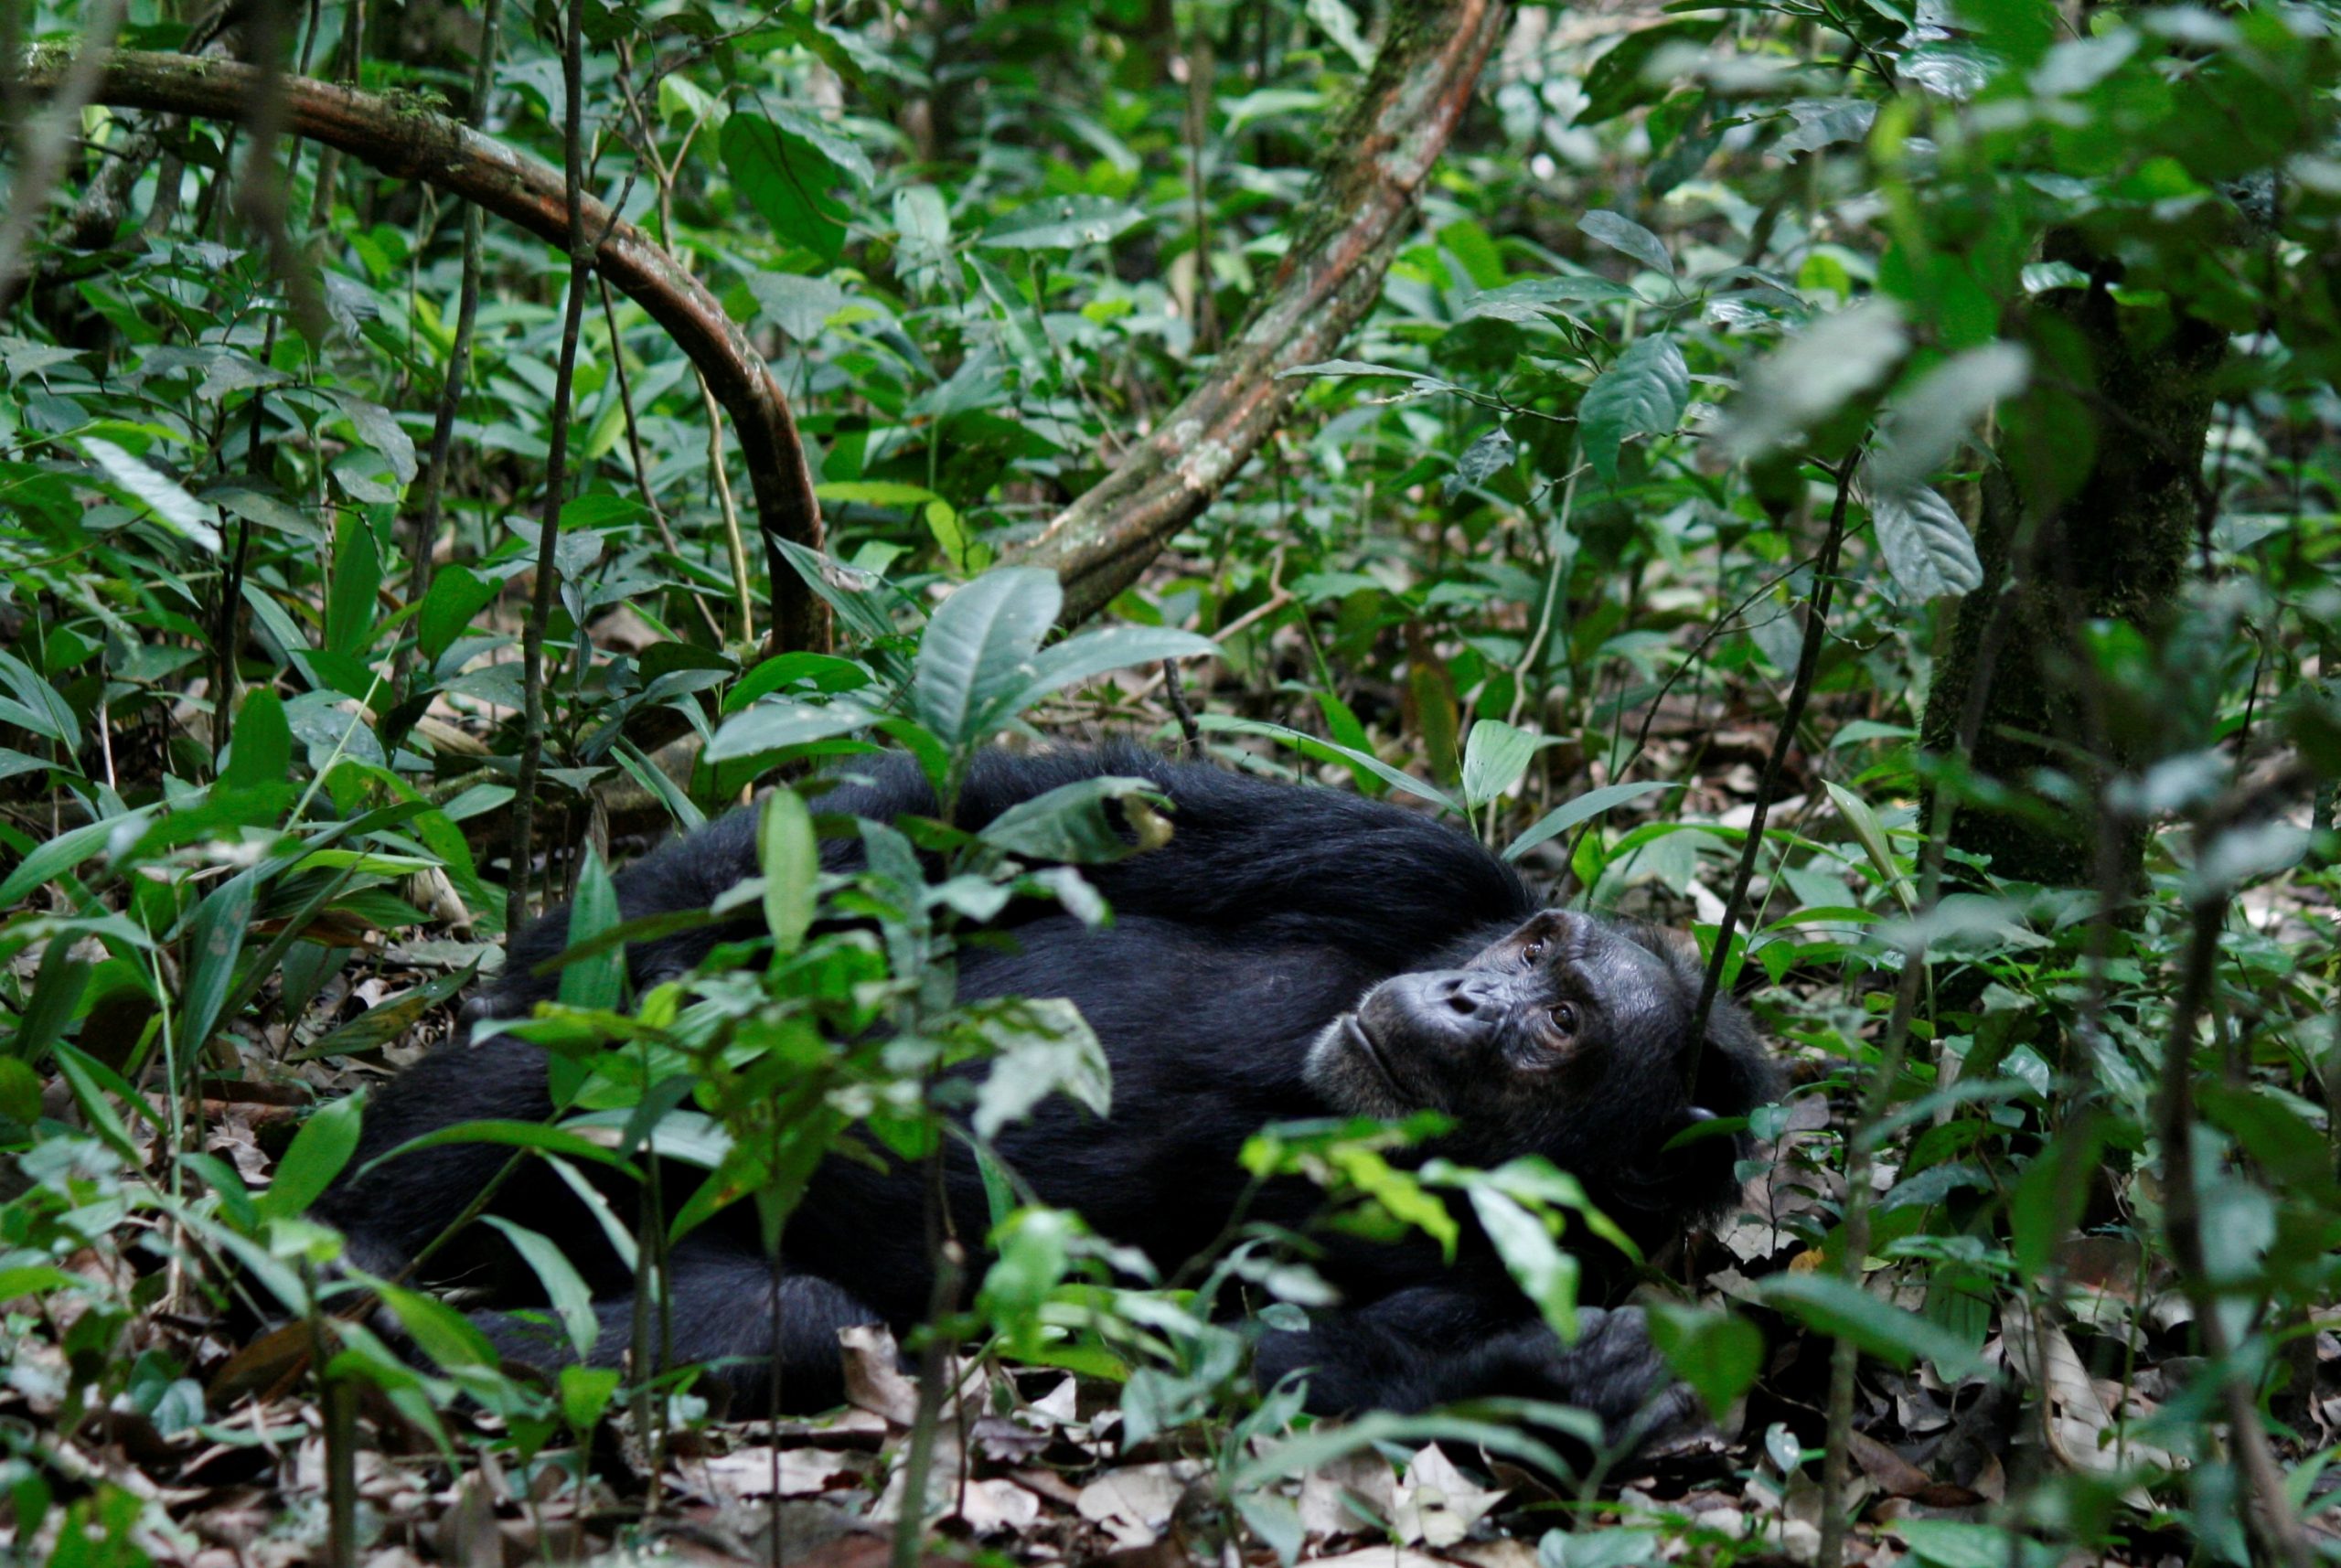 How Many Chimpanzees Are In Kibale National Park